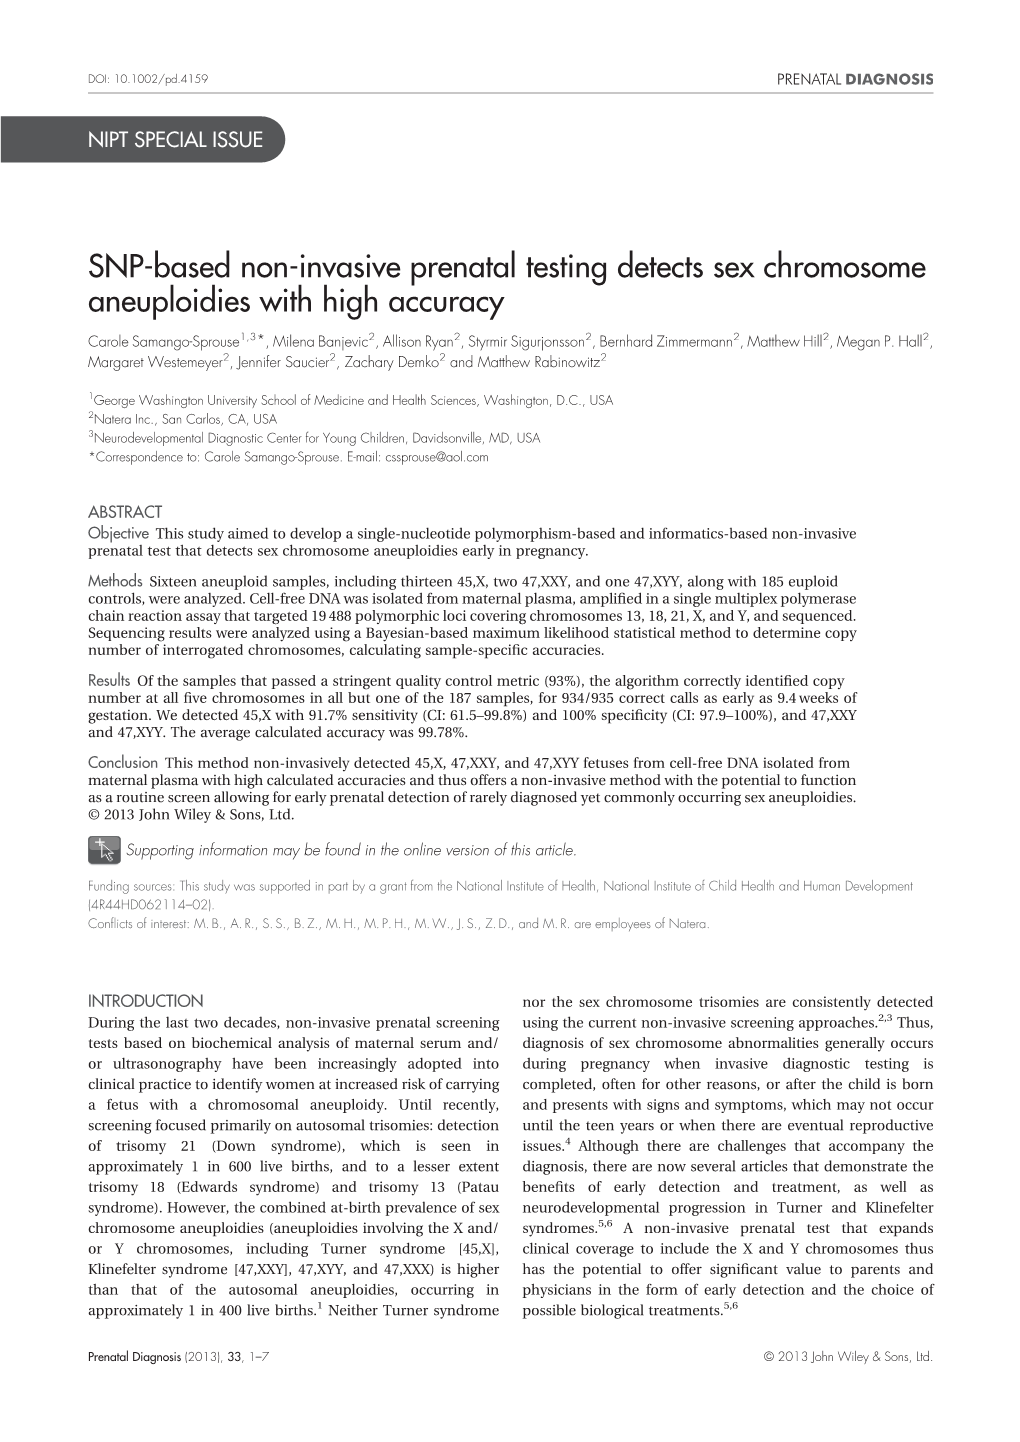 SNP-Based Non-Invasive Prenatal Testing Detects Sex Chromosome Aneuploidies with High Accuracy